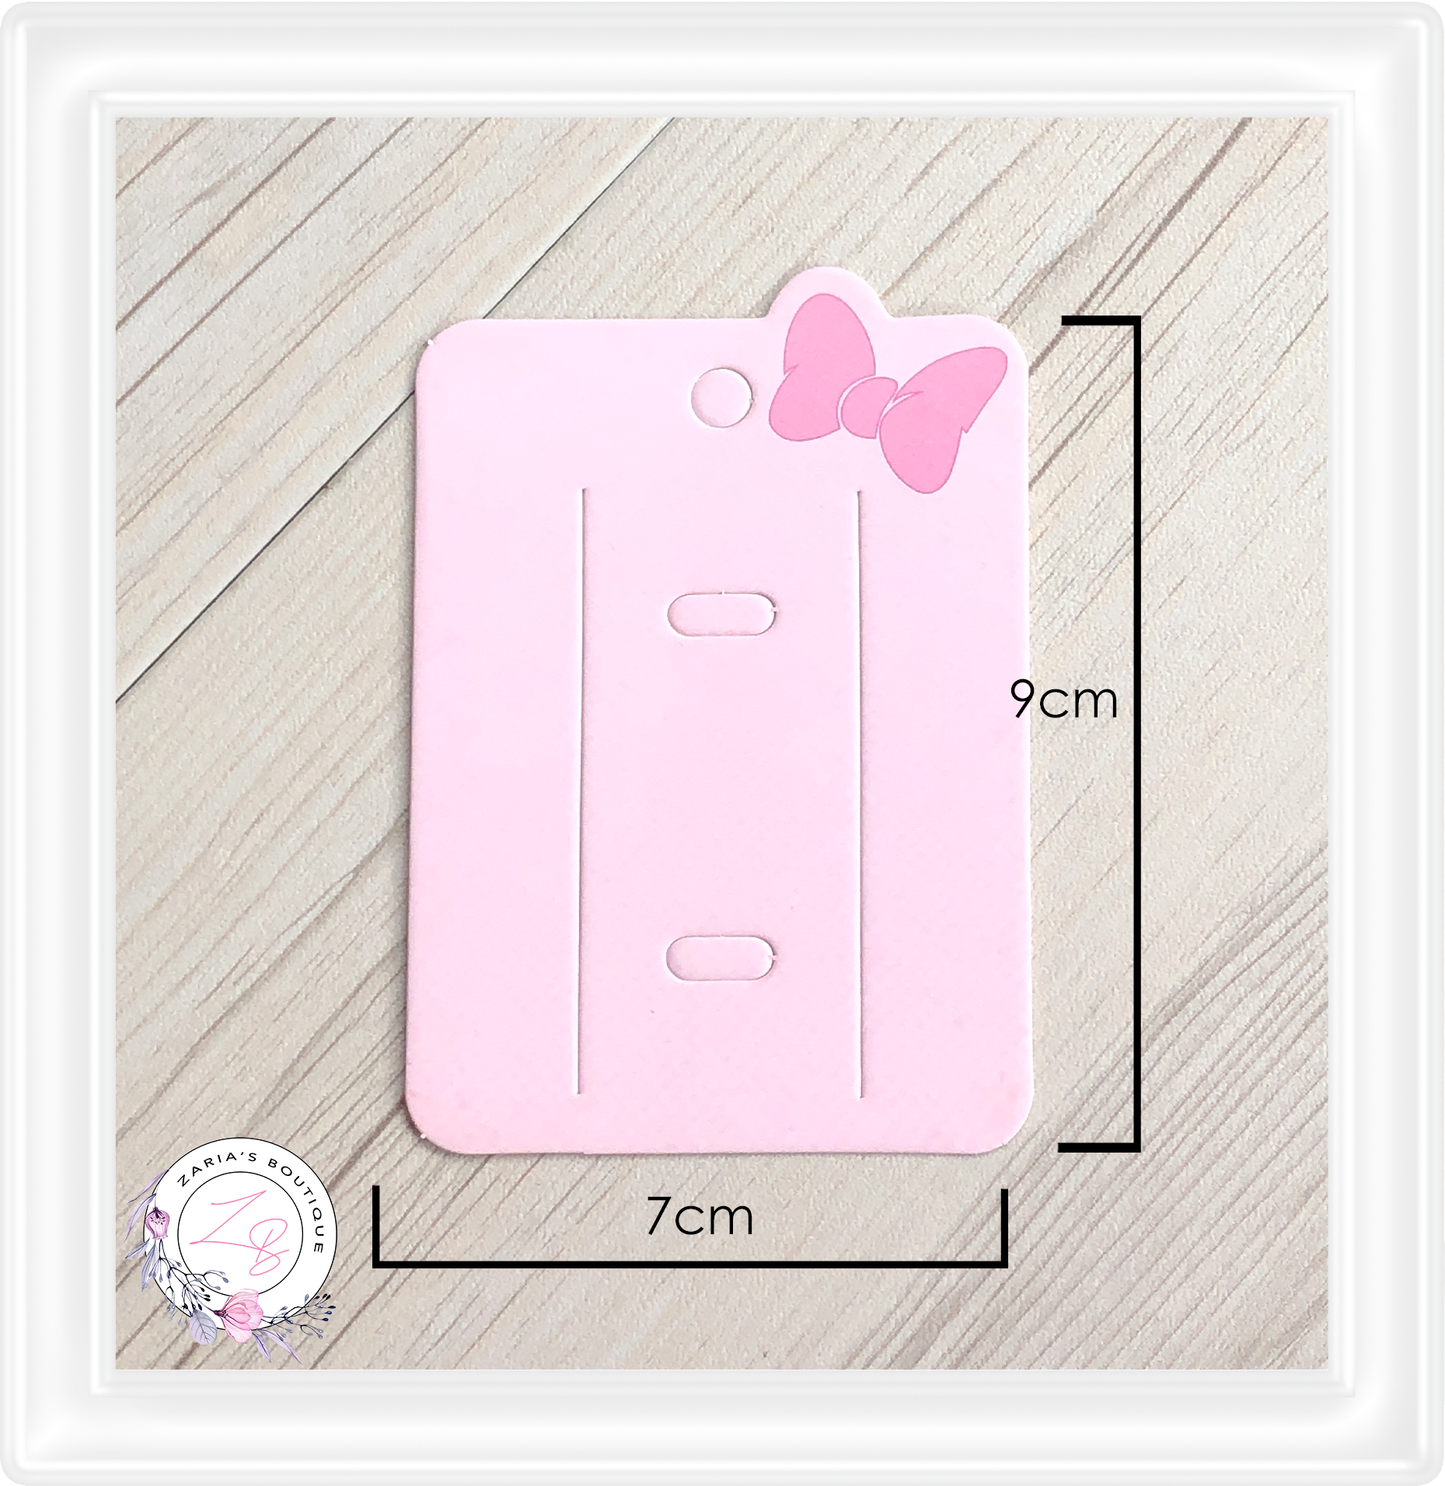 ⋅ Bow Clip & Jewellery Packaging ⋅ Pink ⋅ 10 or 50 pk